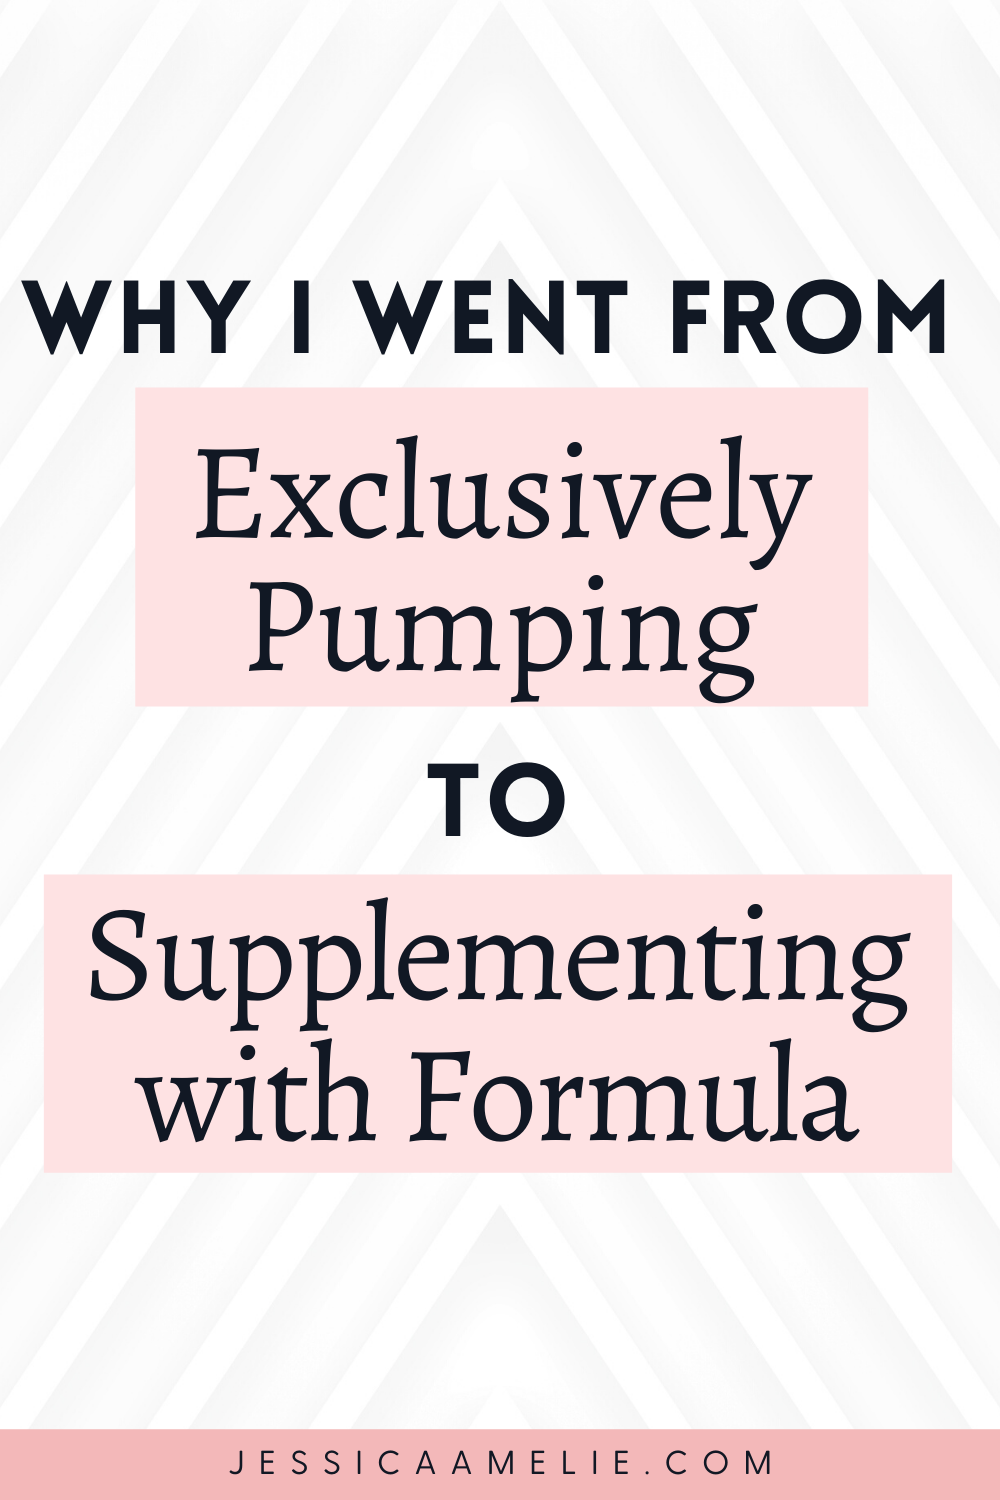 Why I Went from Exclusively Pumping to Supplementing with Formula